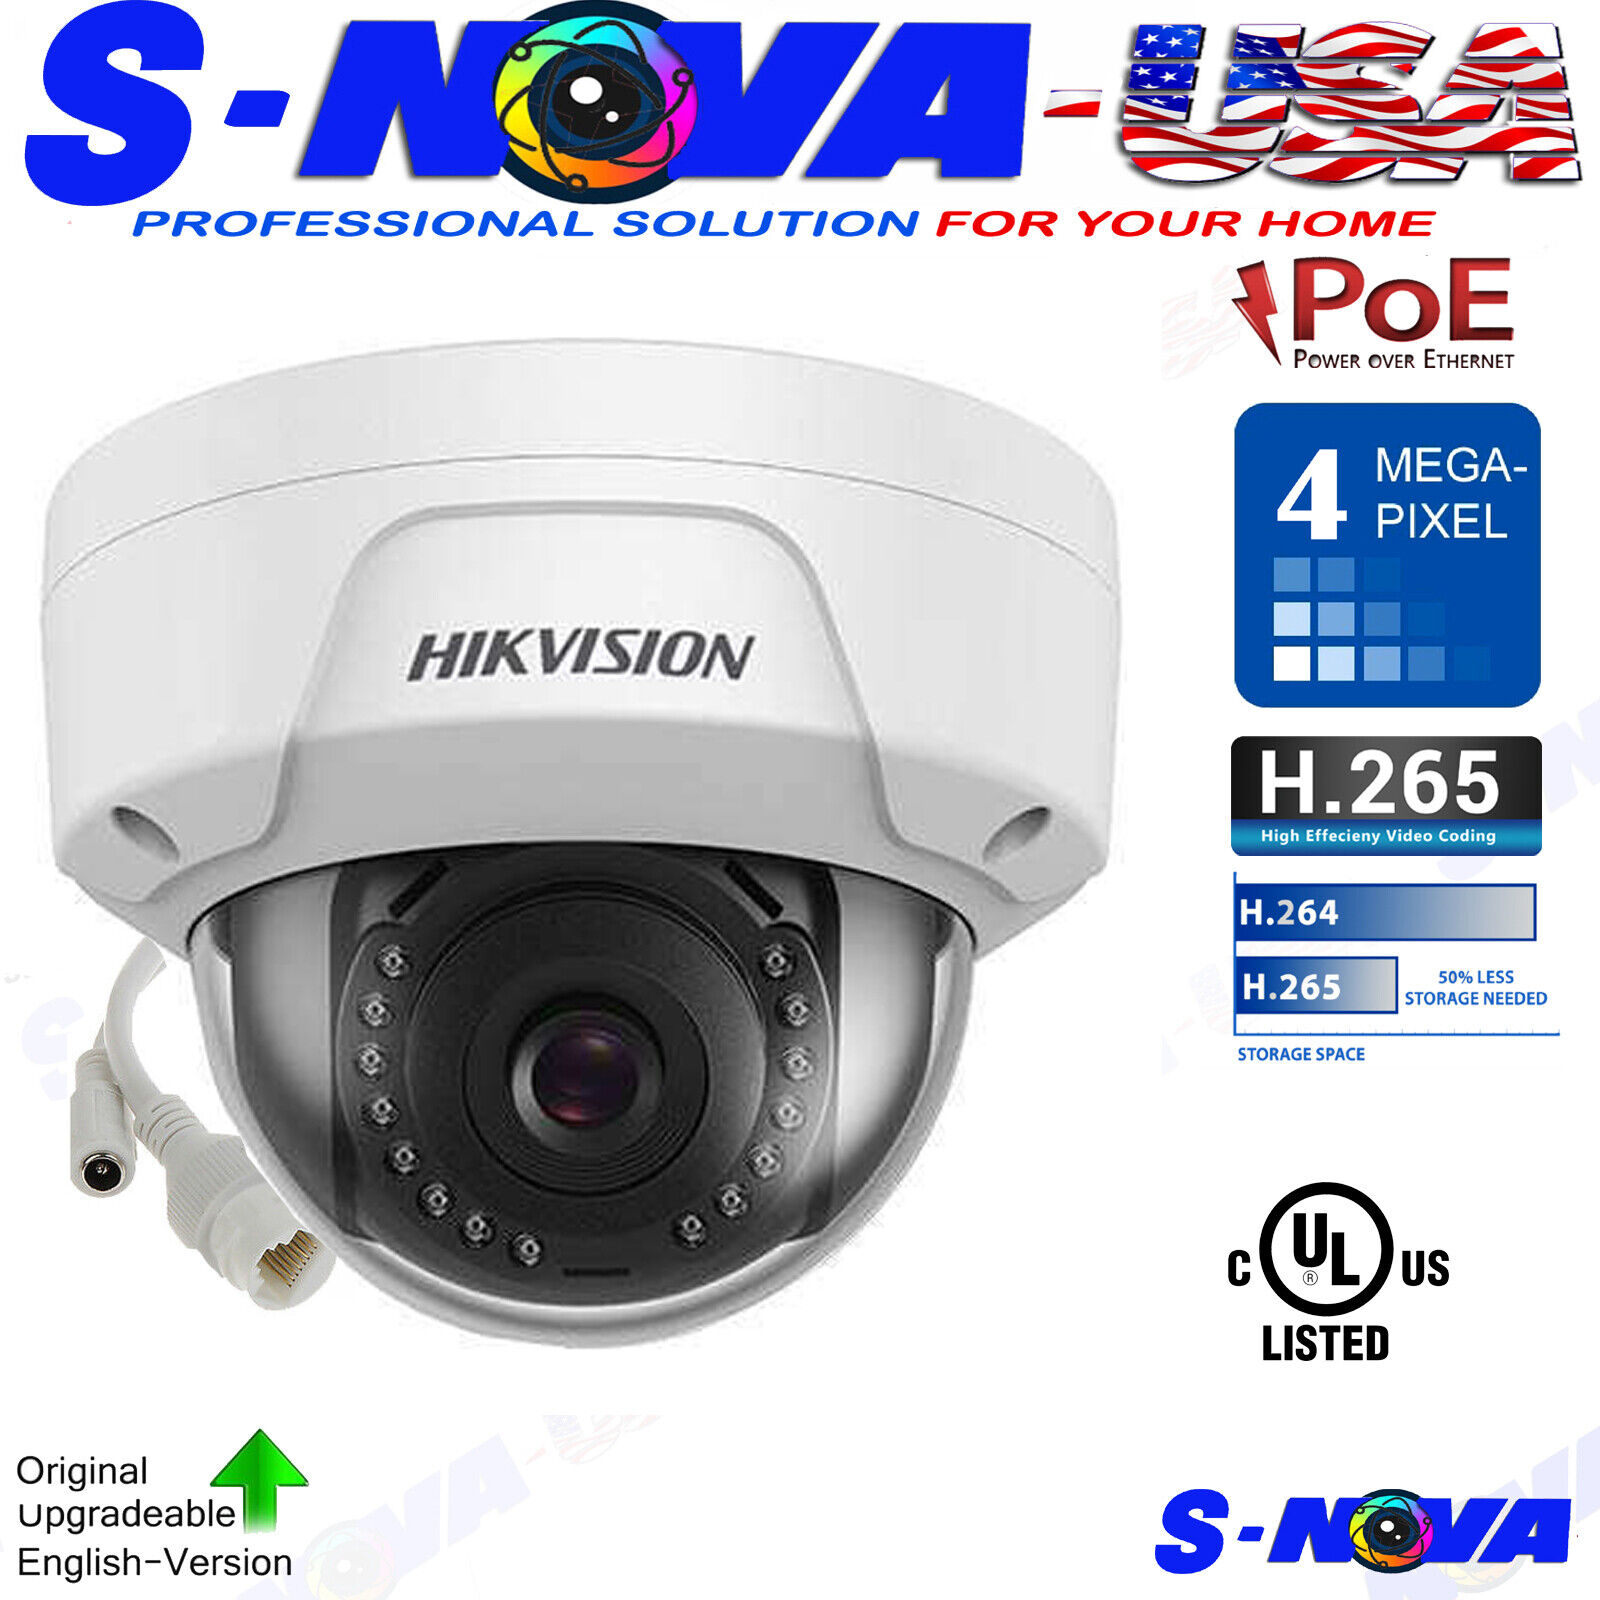 4mp Poe Ip Dome Network Camera H.265+ 2.8mm Wide Angle 2-axi